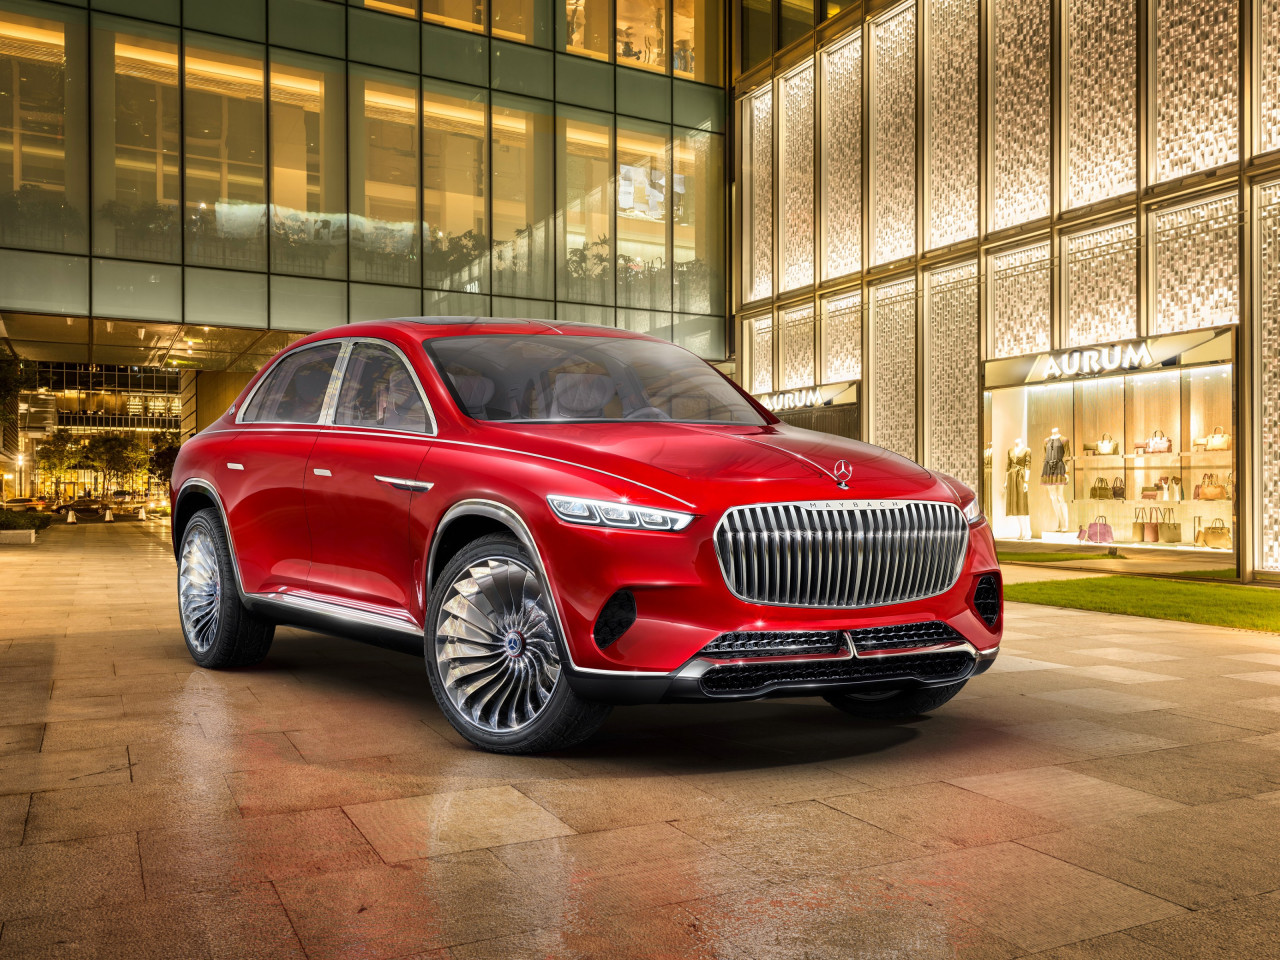 The Vision Mercedes Maybach Ultimate Luxury wallpaper 1280x960